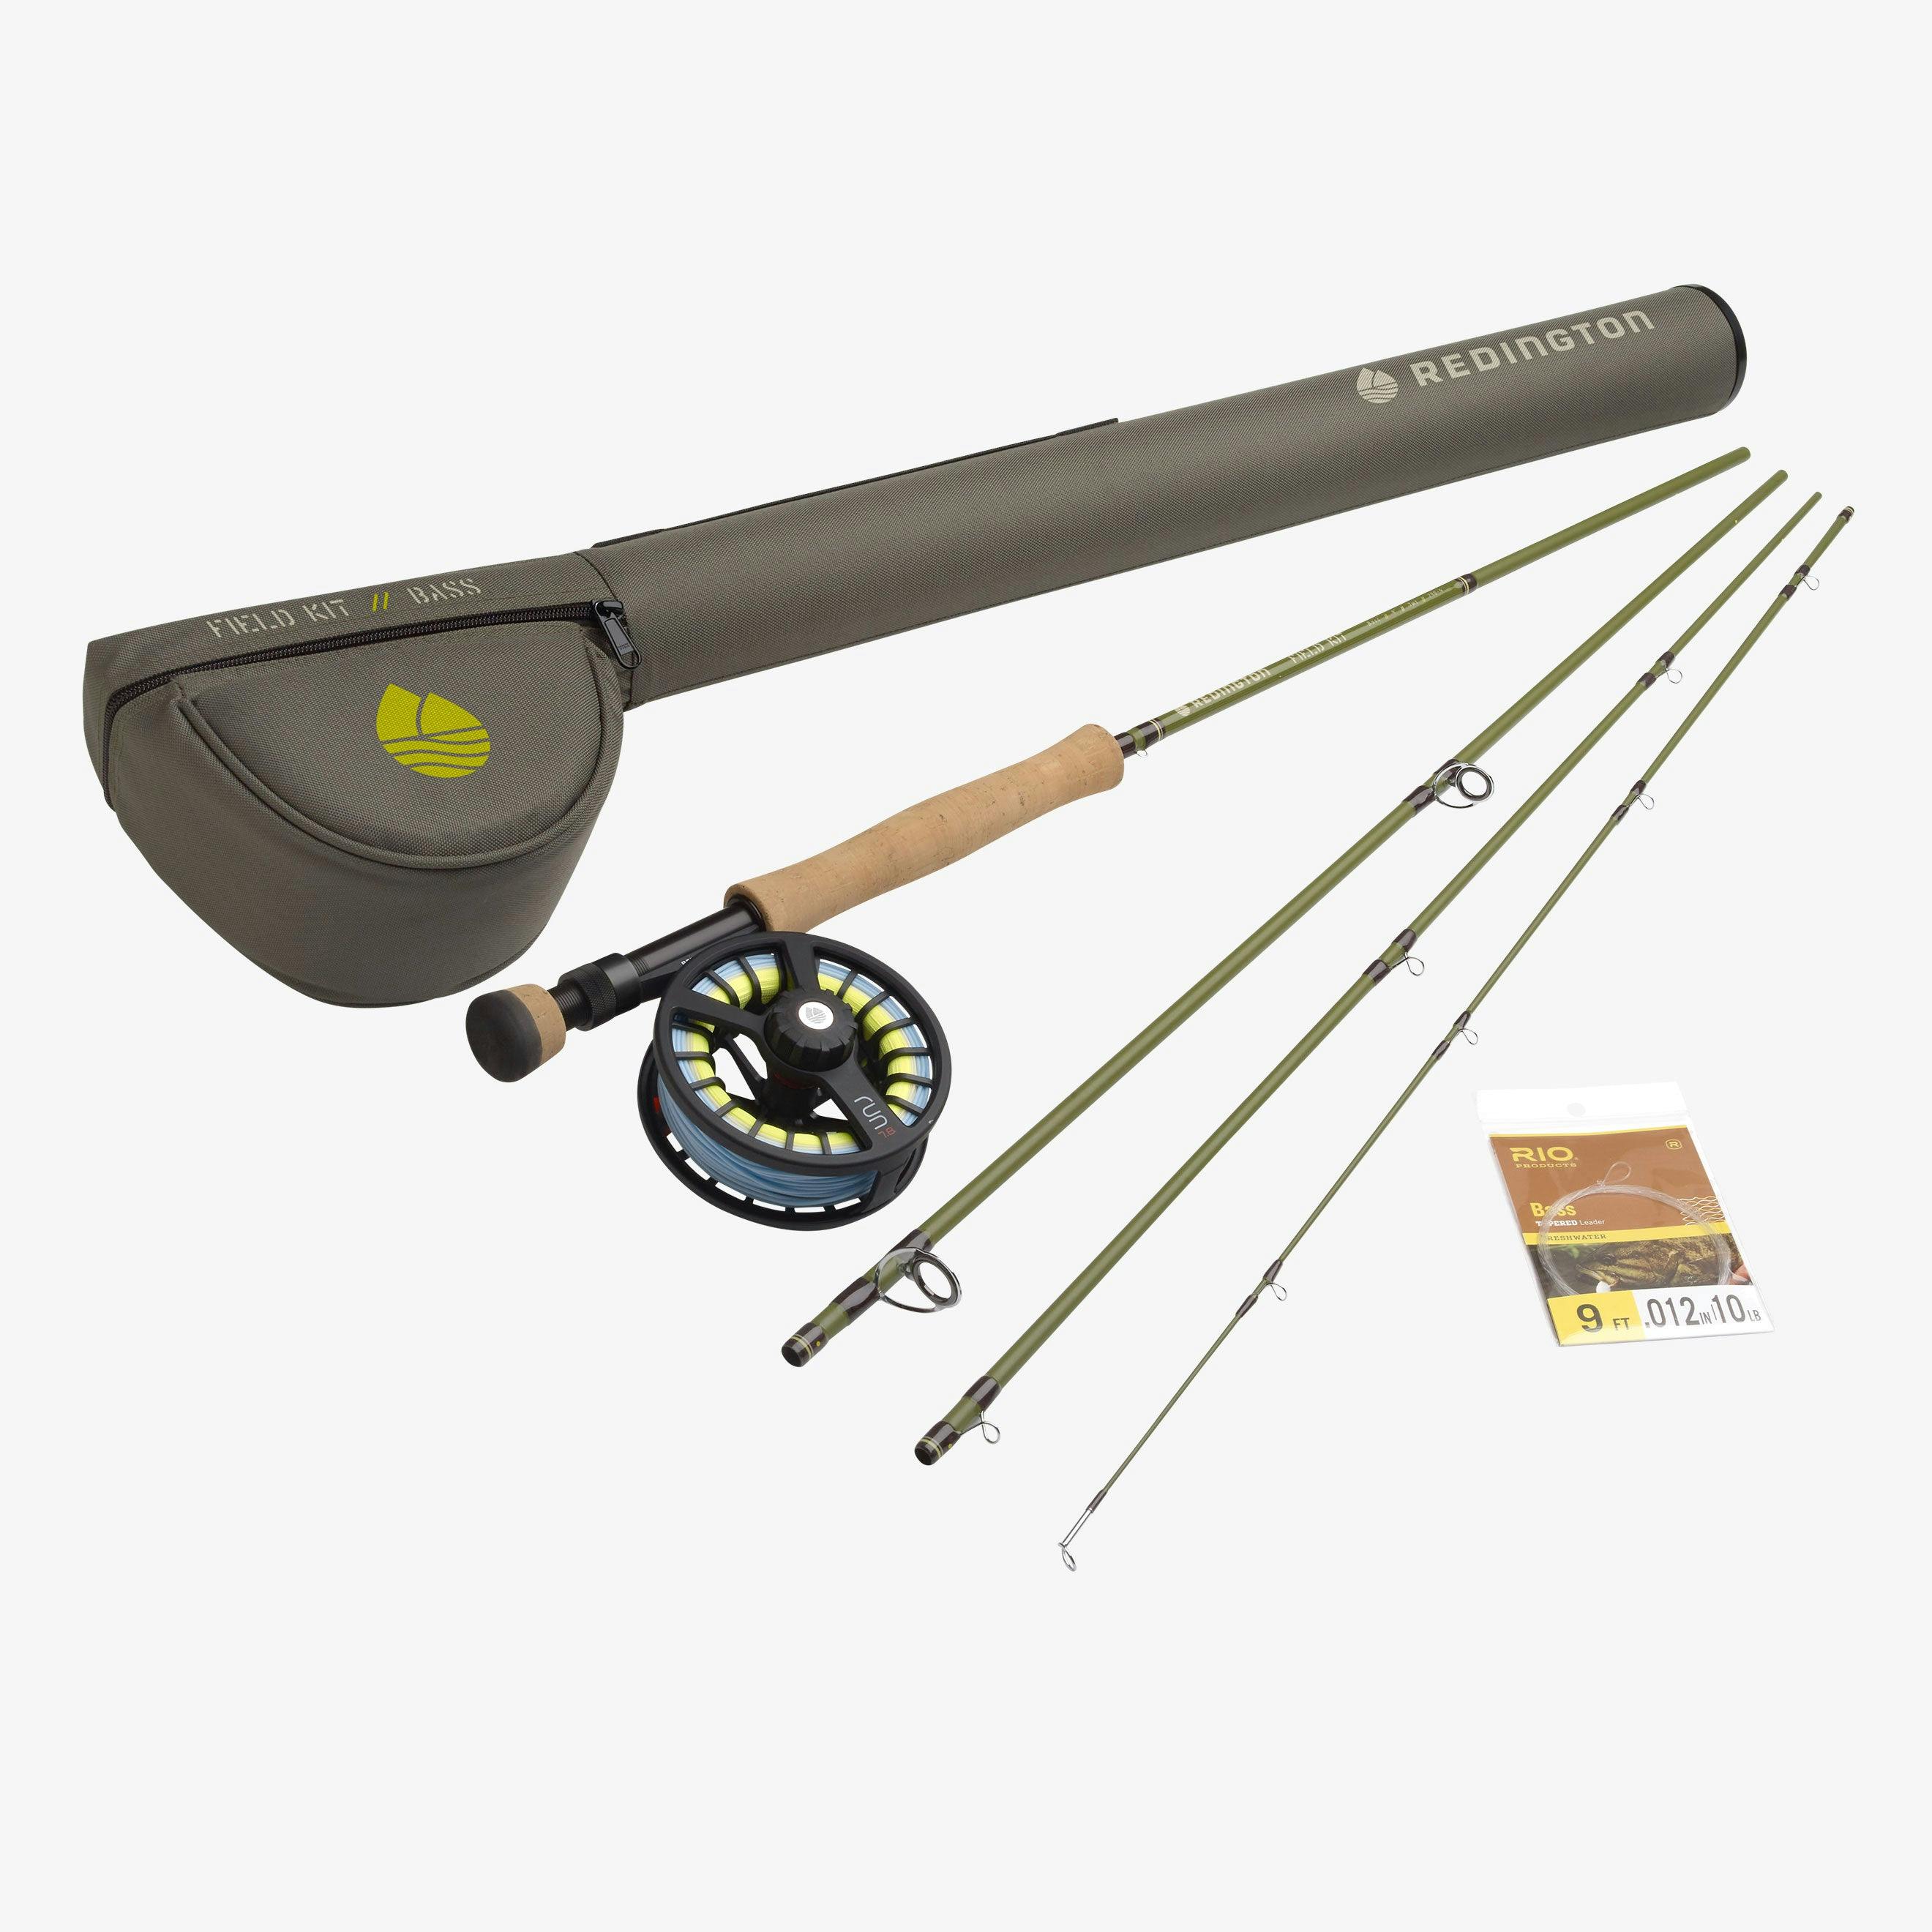 Orvis Clearwater 3wt 10'0 Nymph Outfit Package | Hydros Nymph Line,  Battenkill